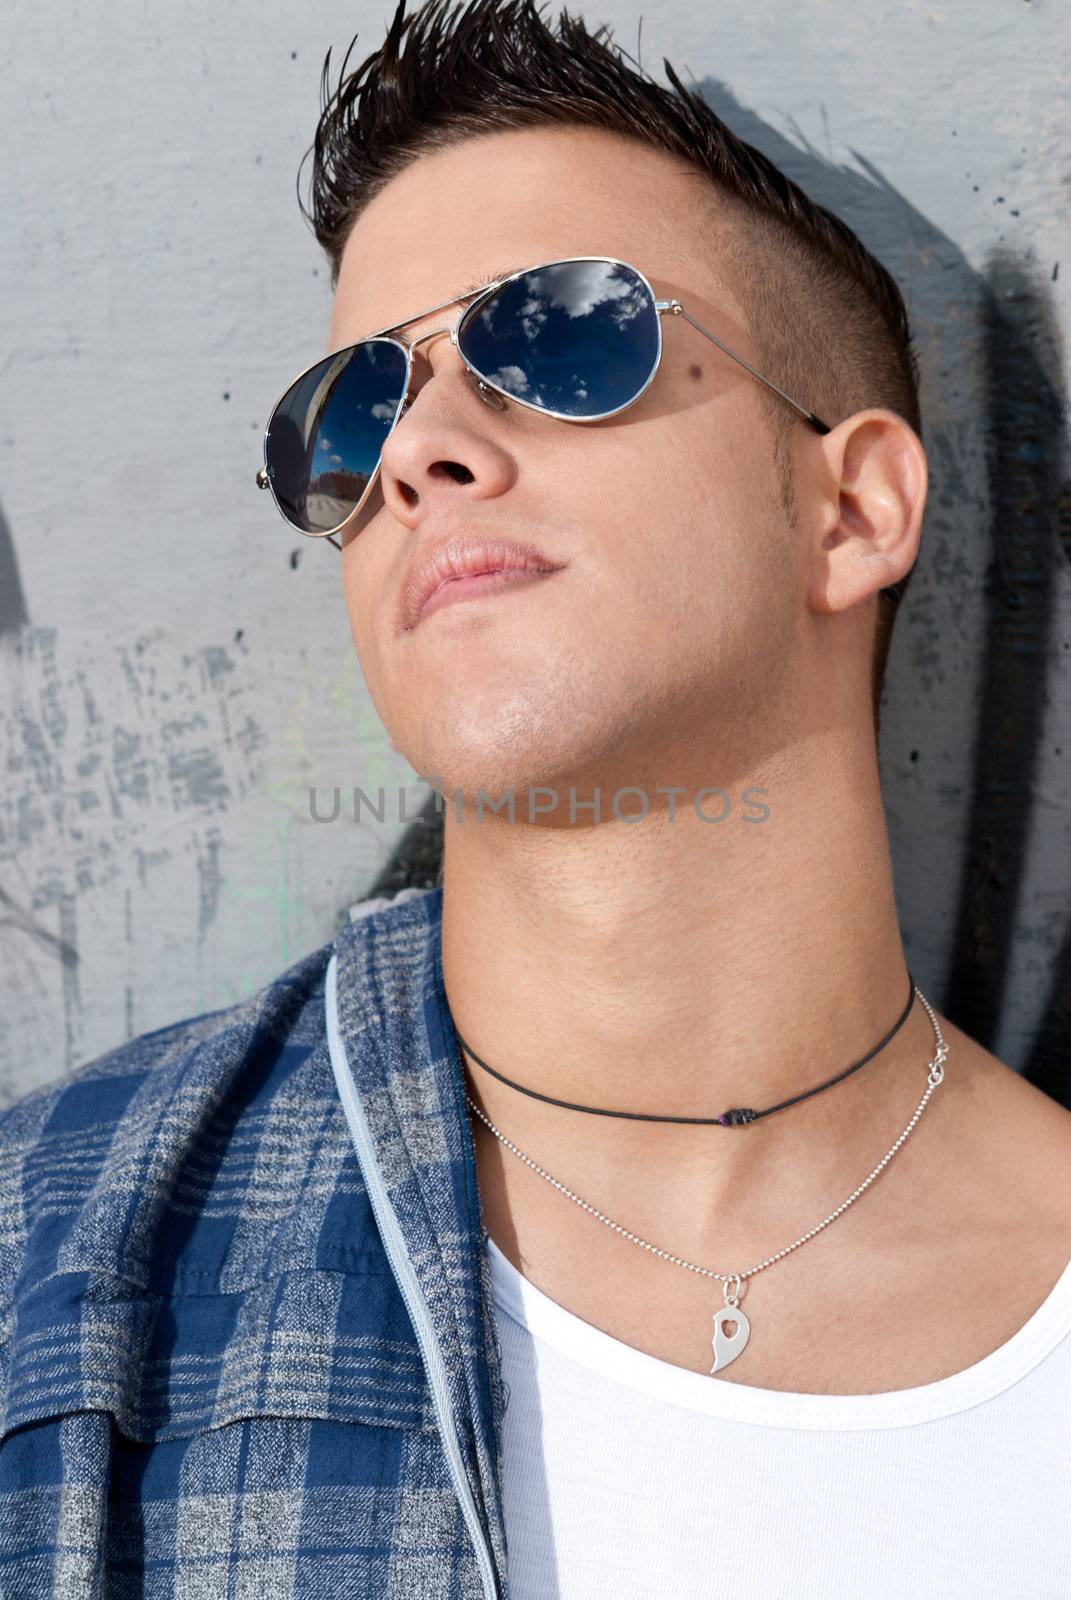 young male urban fashion sky on sunglasses over wall